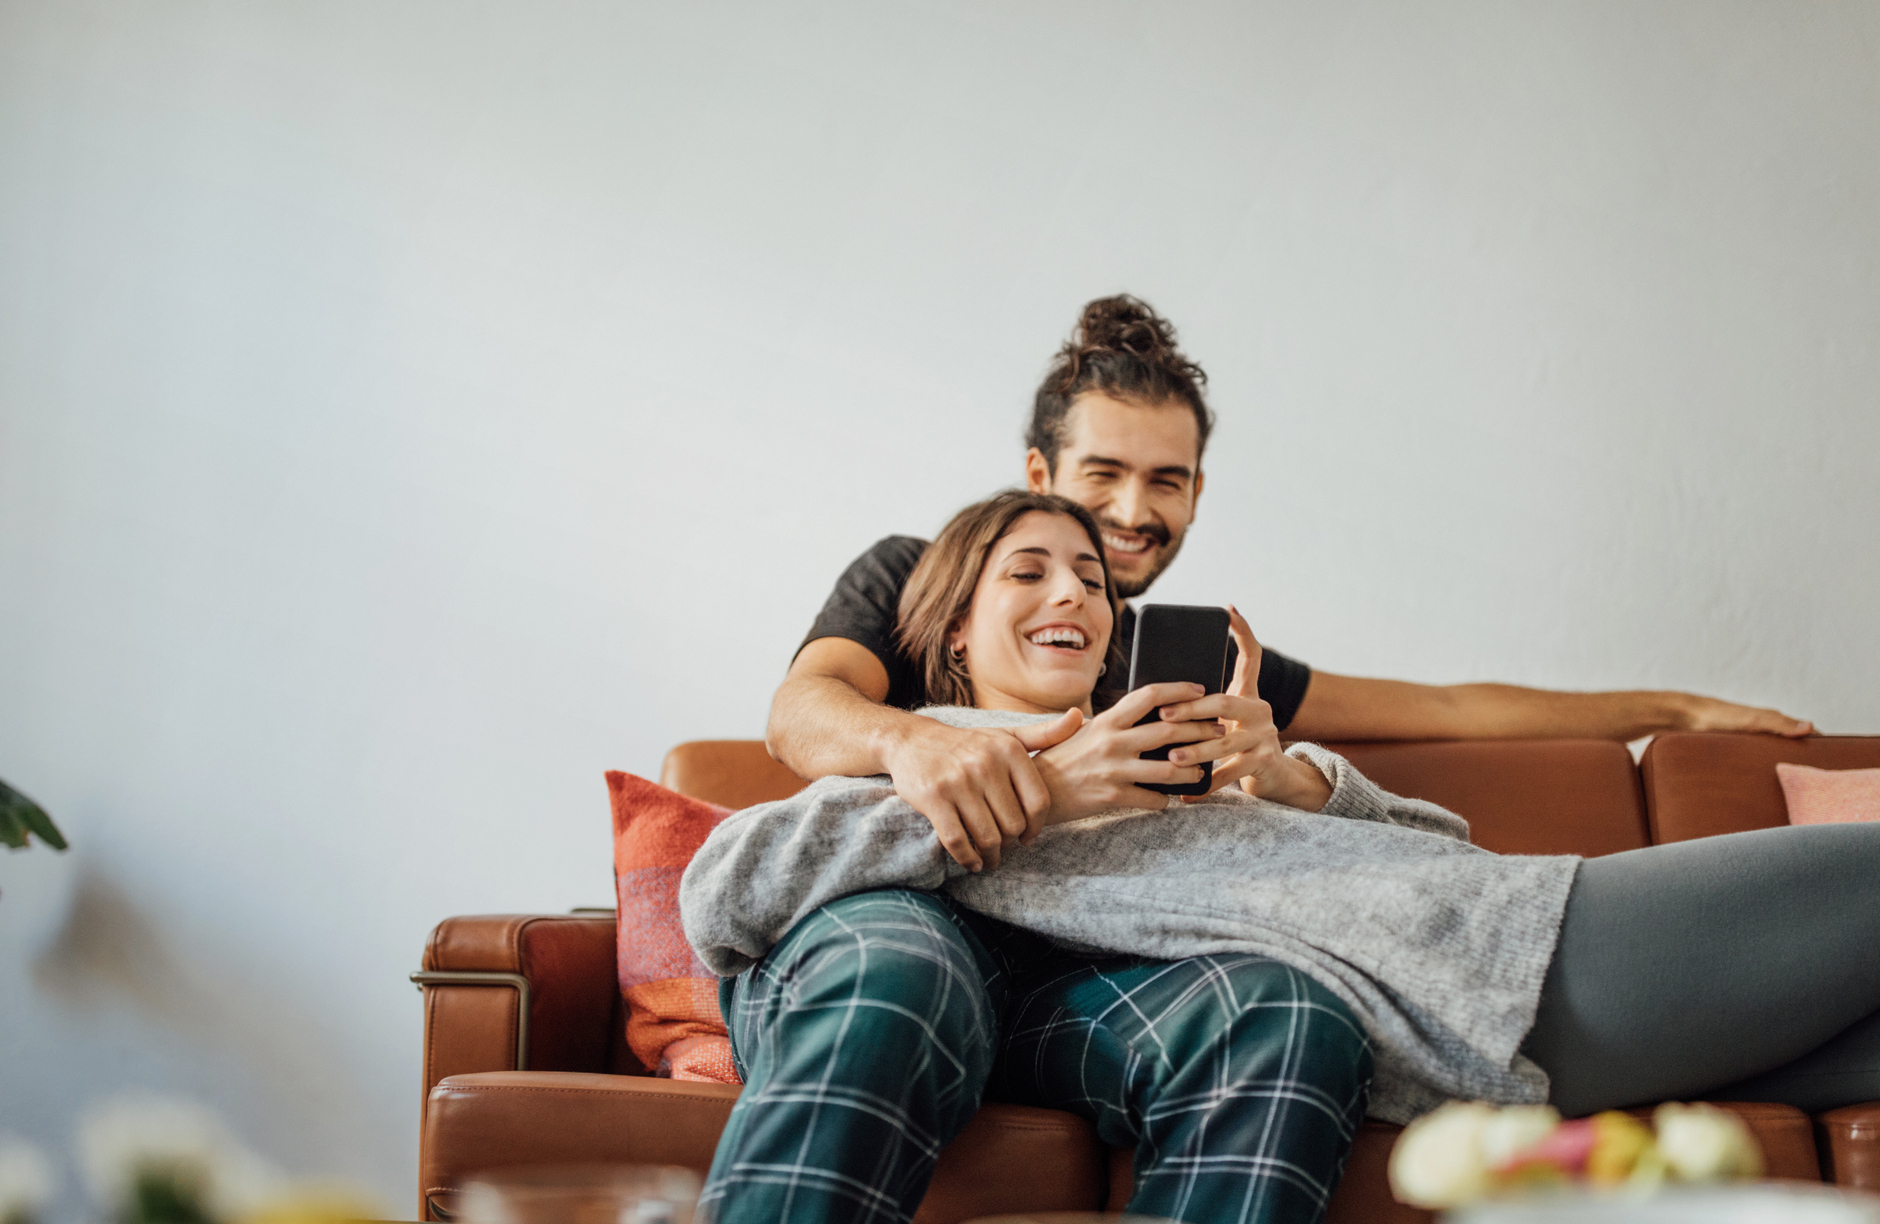 Smiling young woman using smart phone while reclining on boyfriend sitting on sofa at home